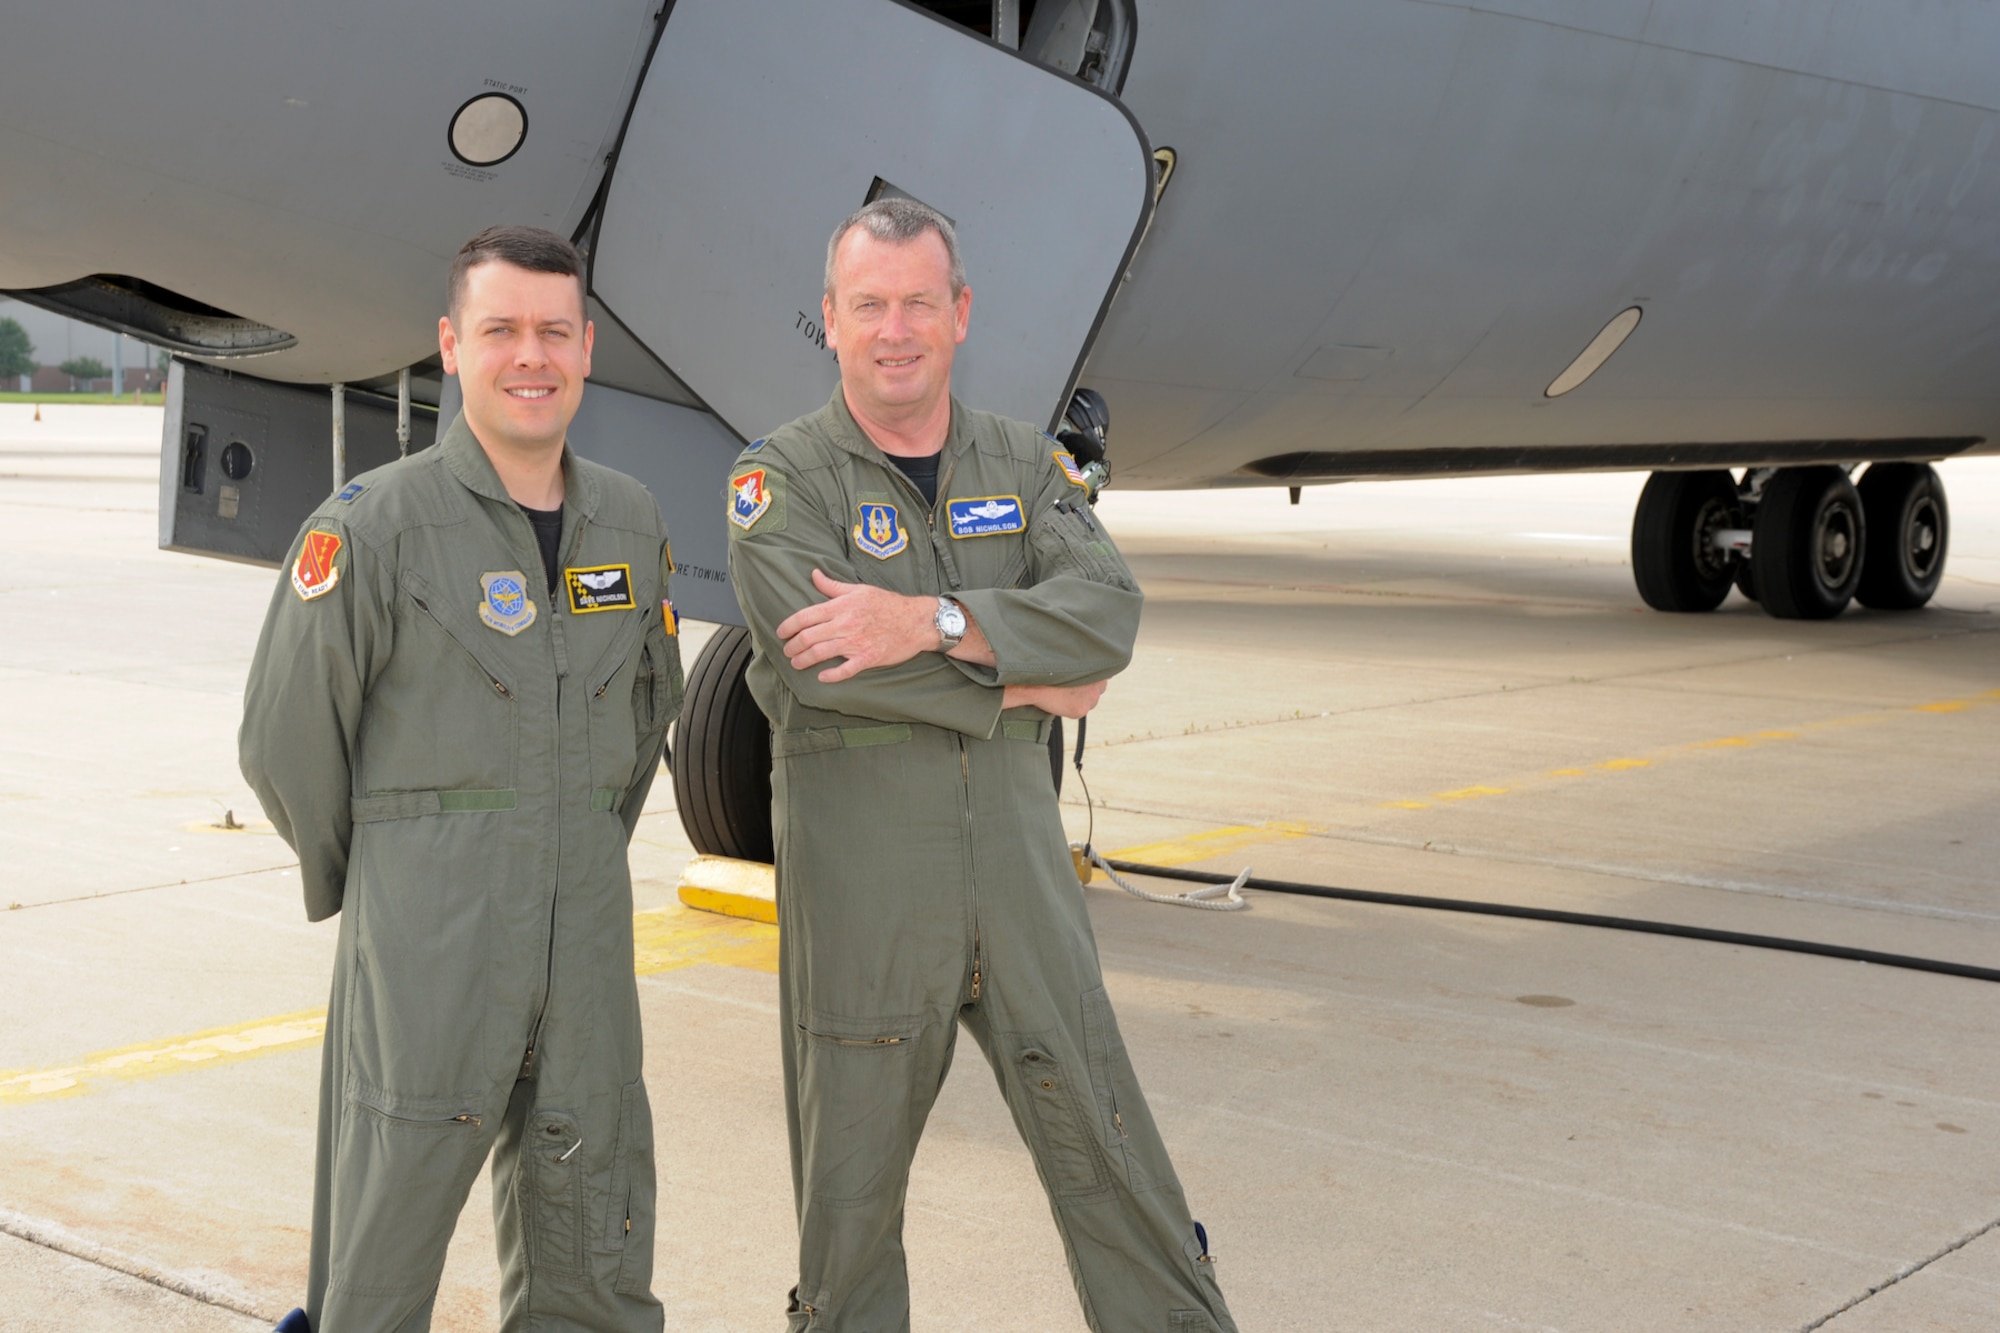 Capt. David Nicholson (left) 127th Air Refueling Group, Michigan Air National Guard, and his father, Lt. Col. Robert Nicholson, 63rd Refueling Squadron, Air Force Reserves, both stationed at Selfridge Air National Guard Base, prepare to fly together on Col. Nicholson's final flight as an Air Force pilot.  The unique mission required approvals by both the Air National Guard and the Air Force Reserves, as the pair are father and son. 